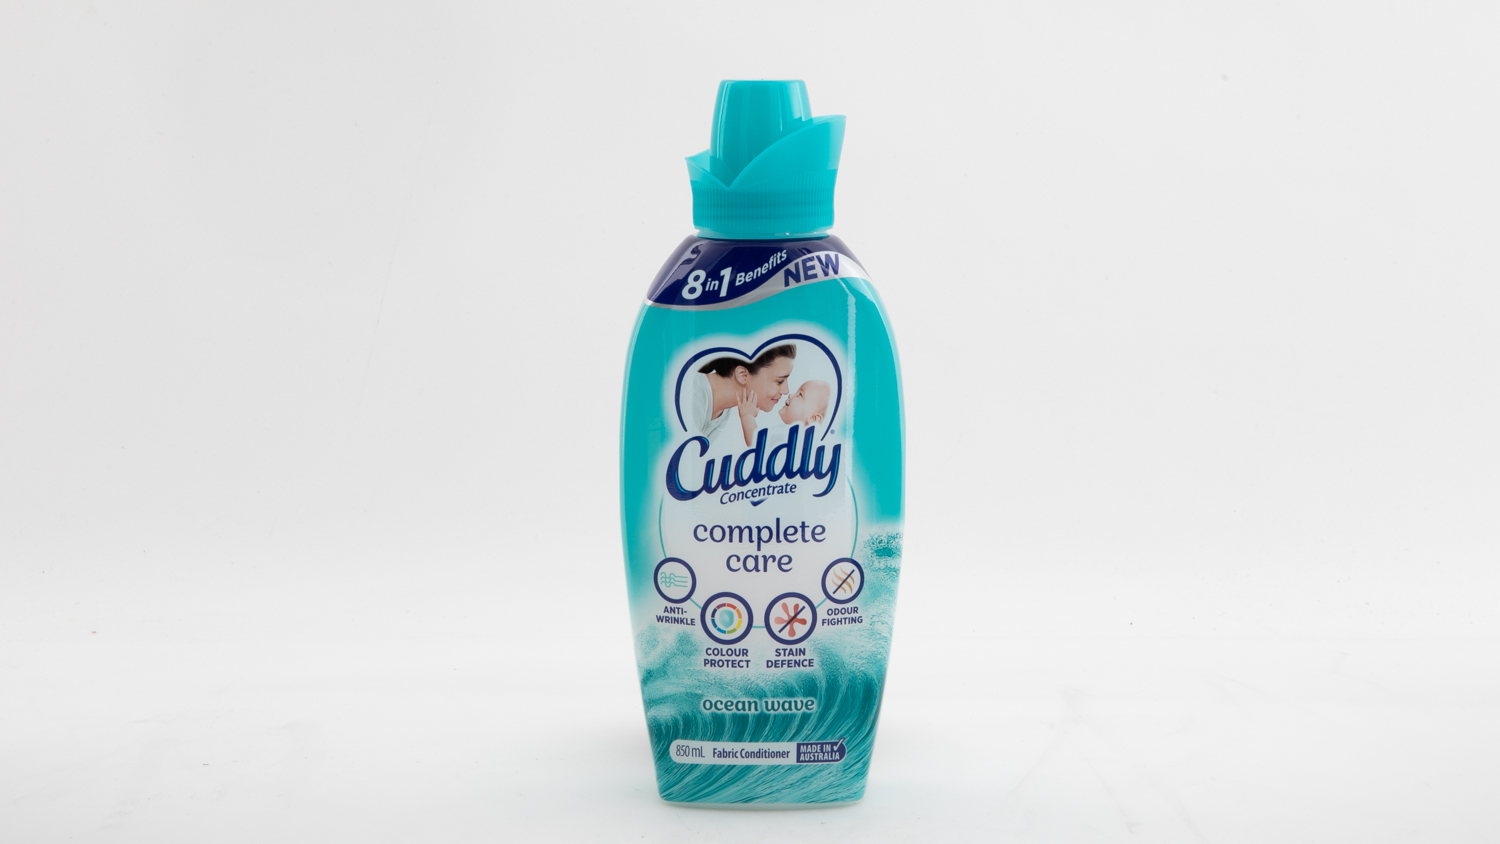 Cuddly Concentrate Complete Care Ocean Wave Fabric Conditioner carousel image